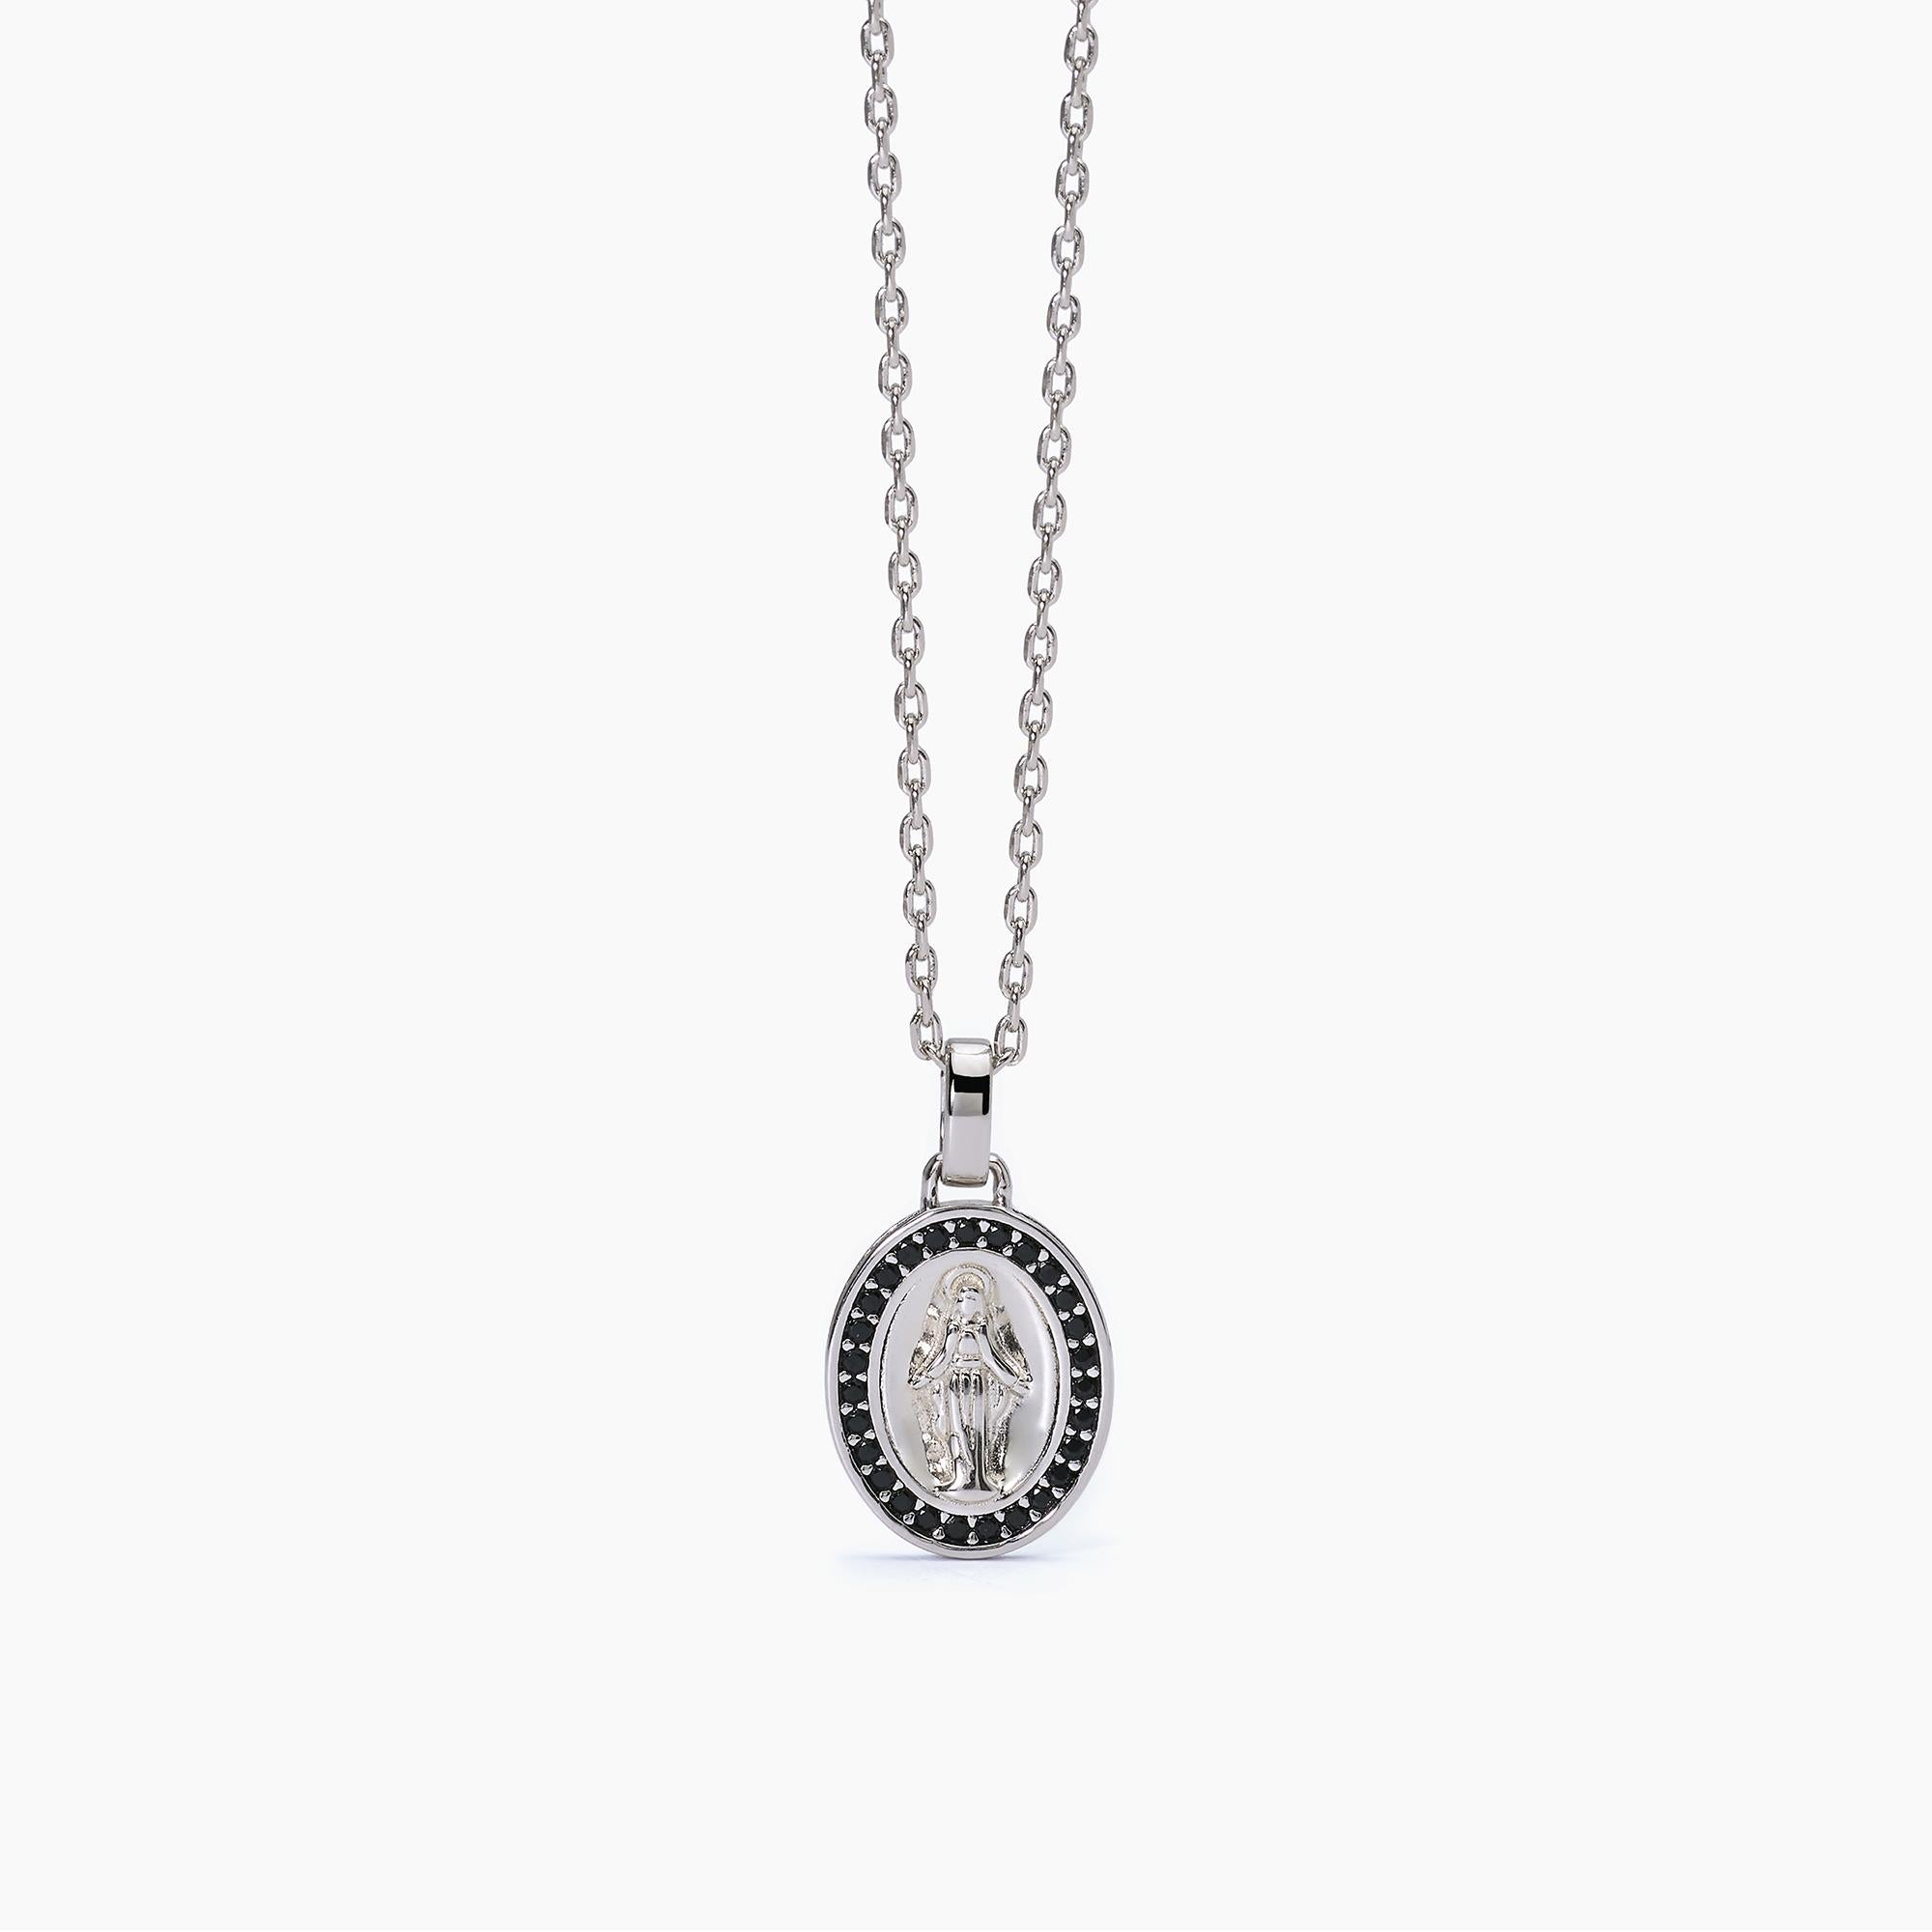 Mabina Man - Silver necklace with MYSTICAL pendant - 553568